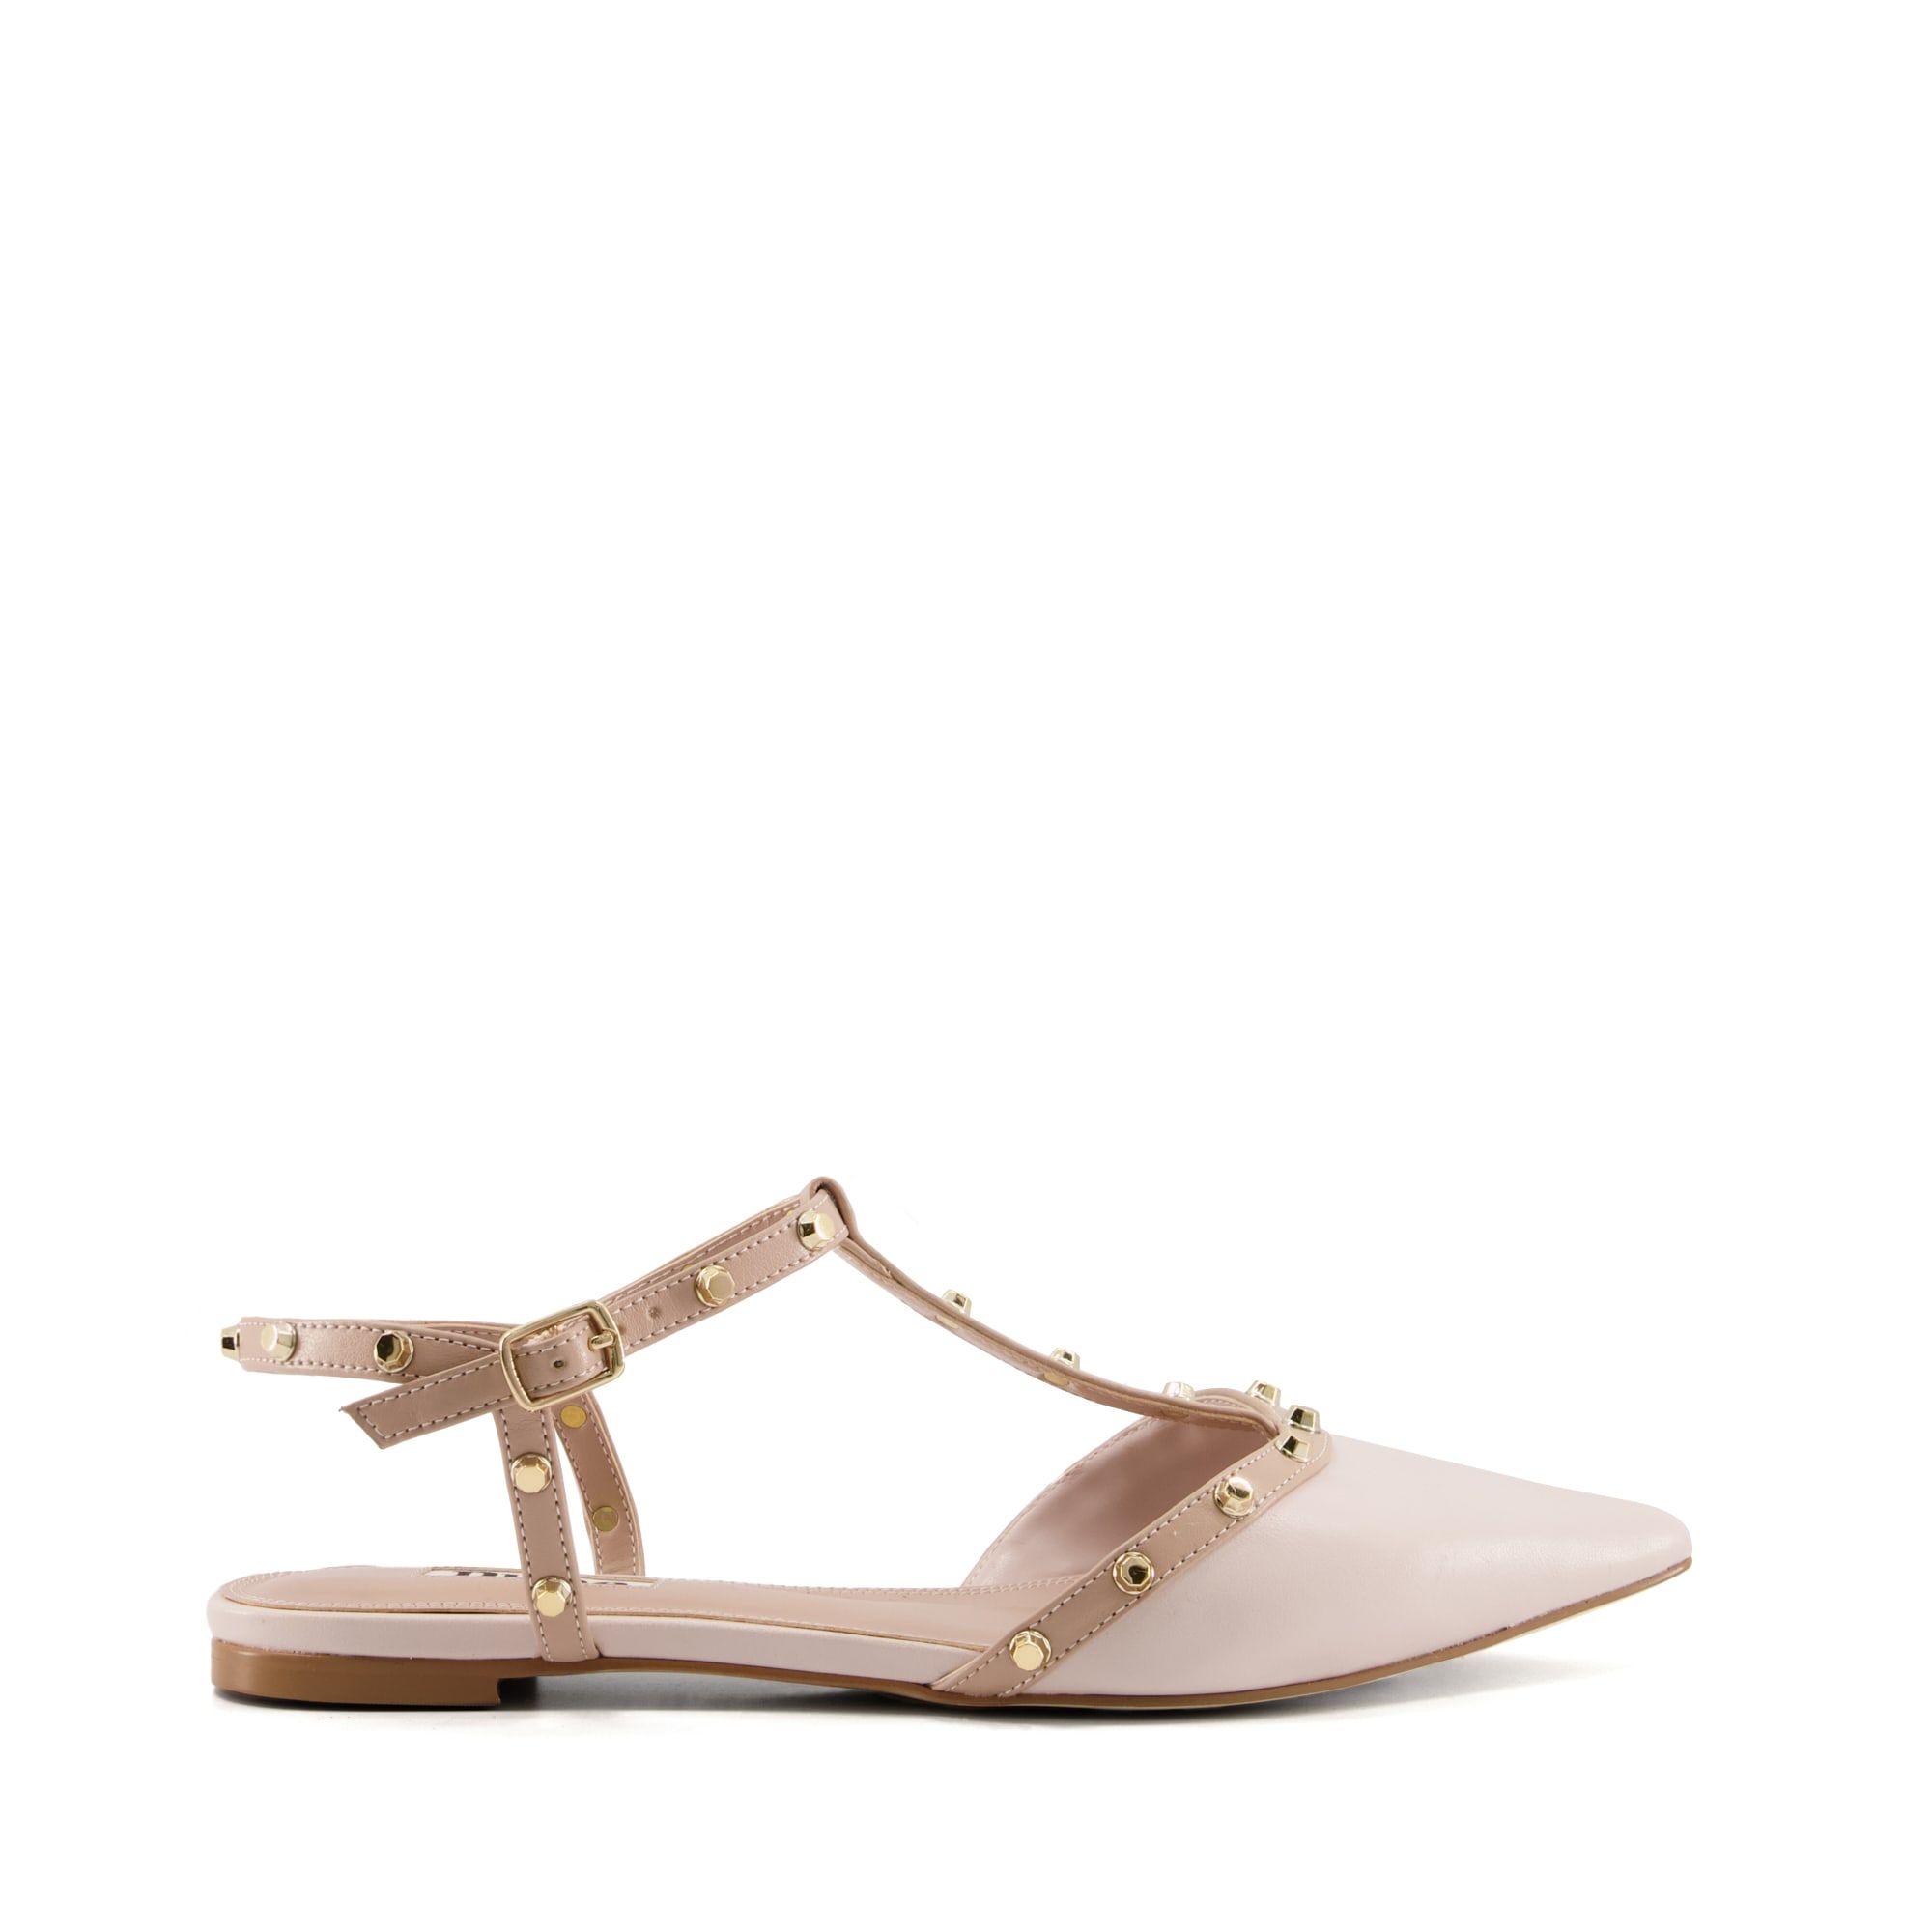 The Cayote flat shoe showcases an open back and sophisticated pointed toe. Featuring a T-bar design with studded hardware trims and stitch detail. The adjustable buckle fastening completes this feminine style.